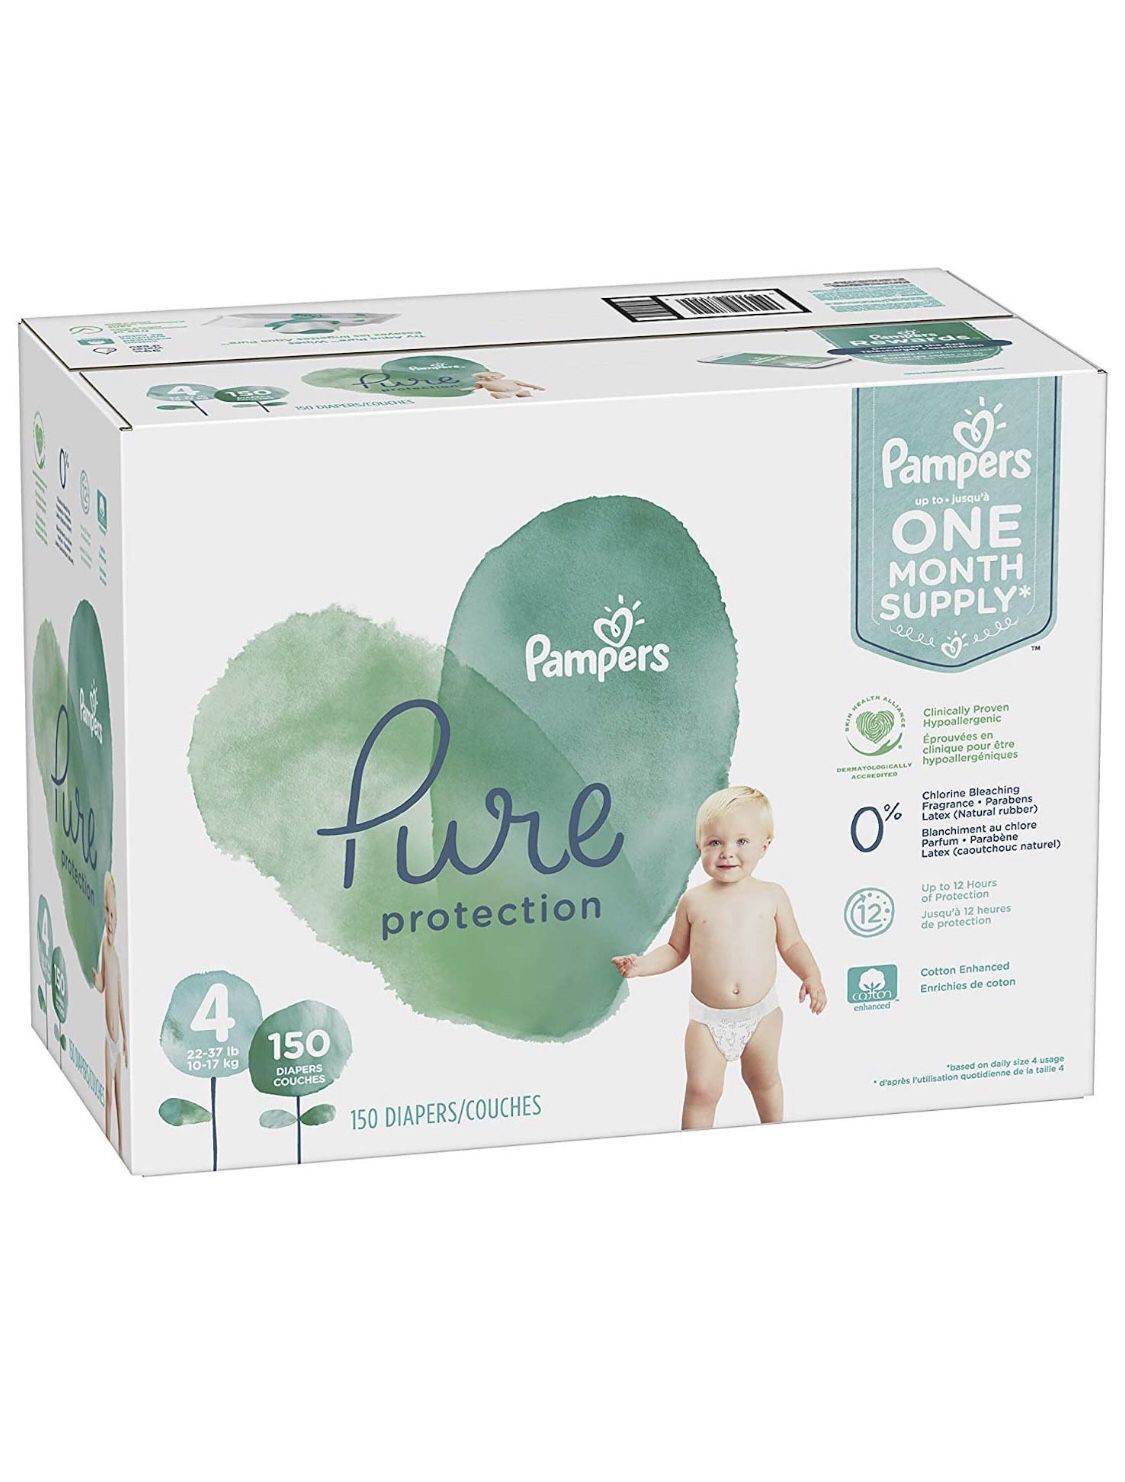 Pampers Pure size 4